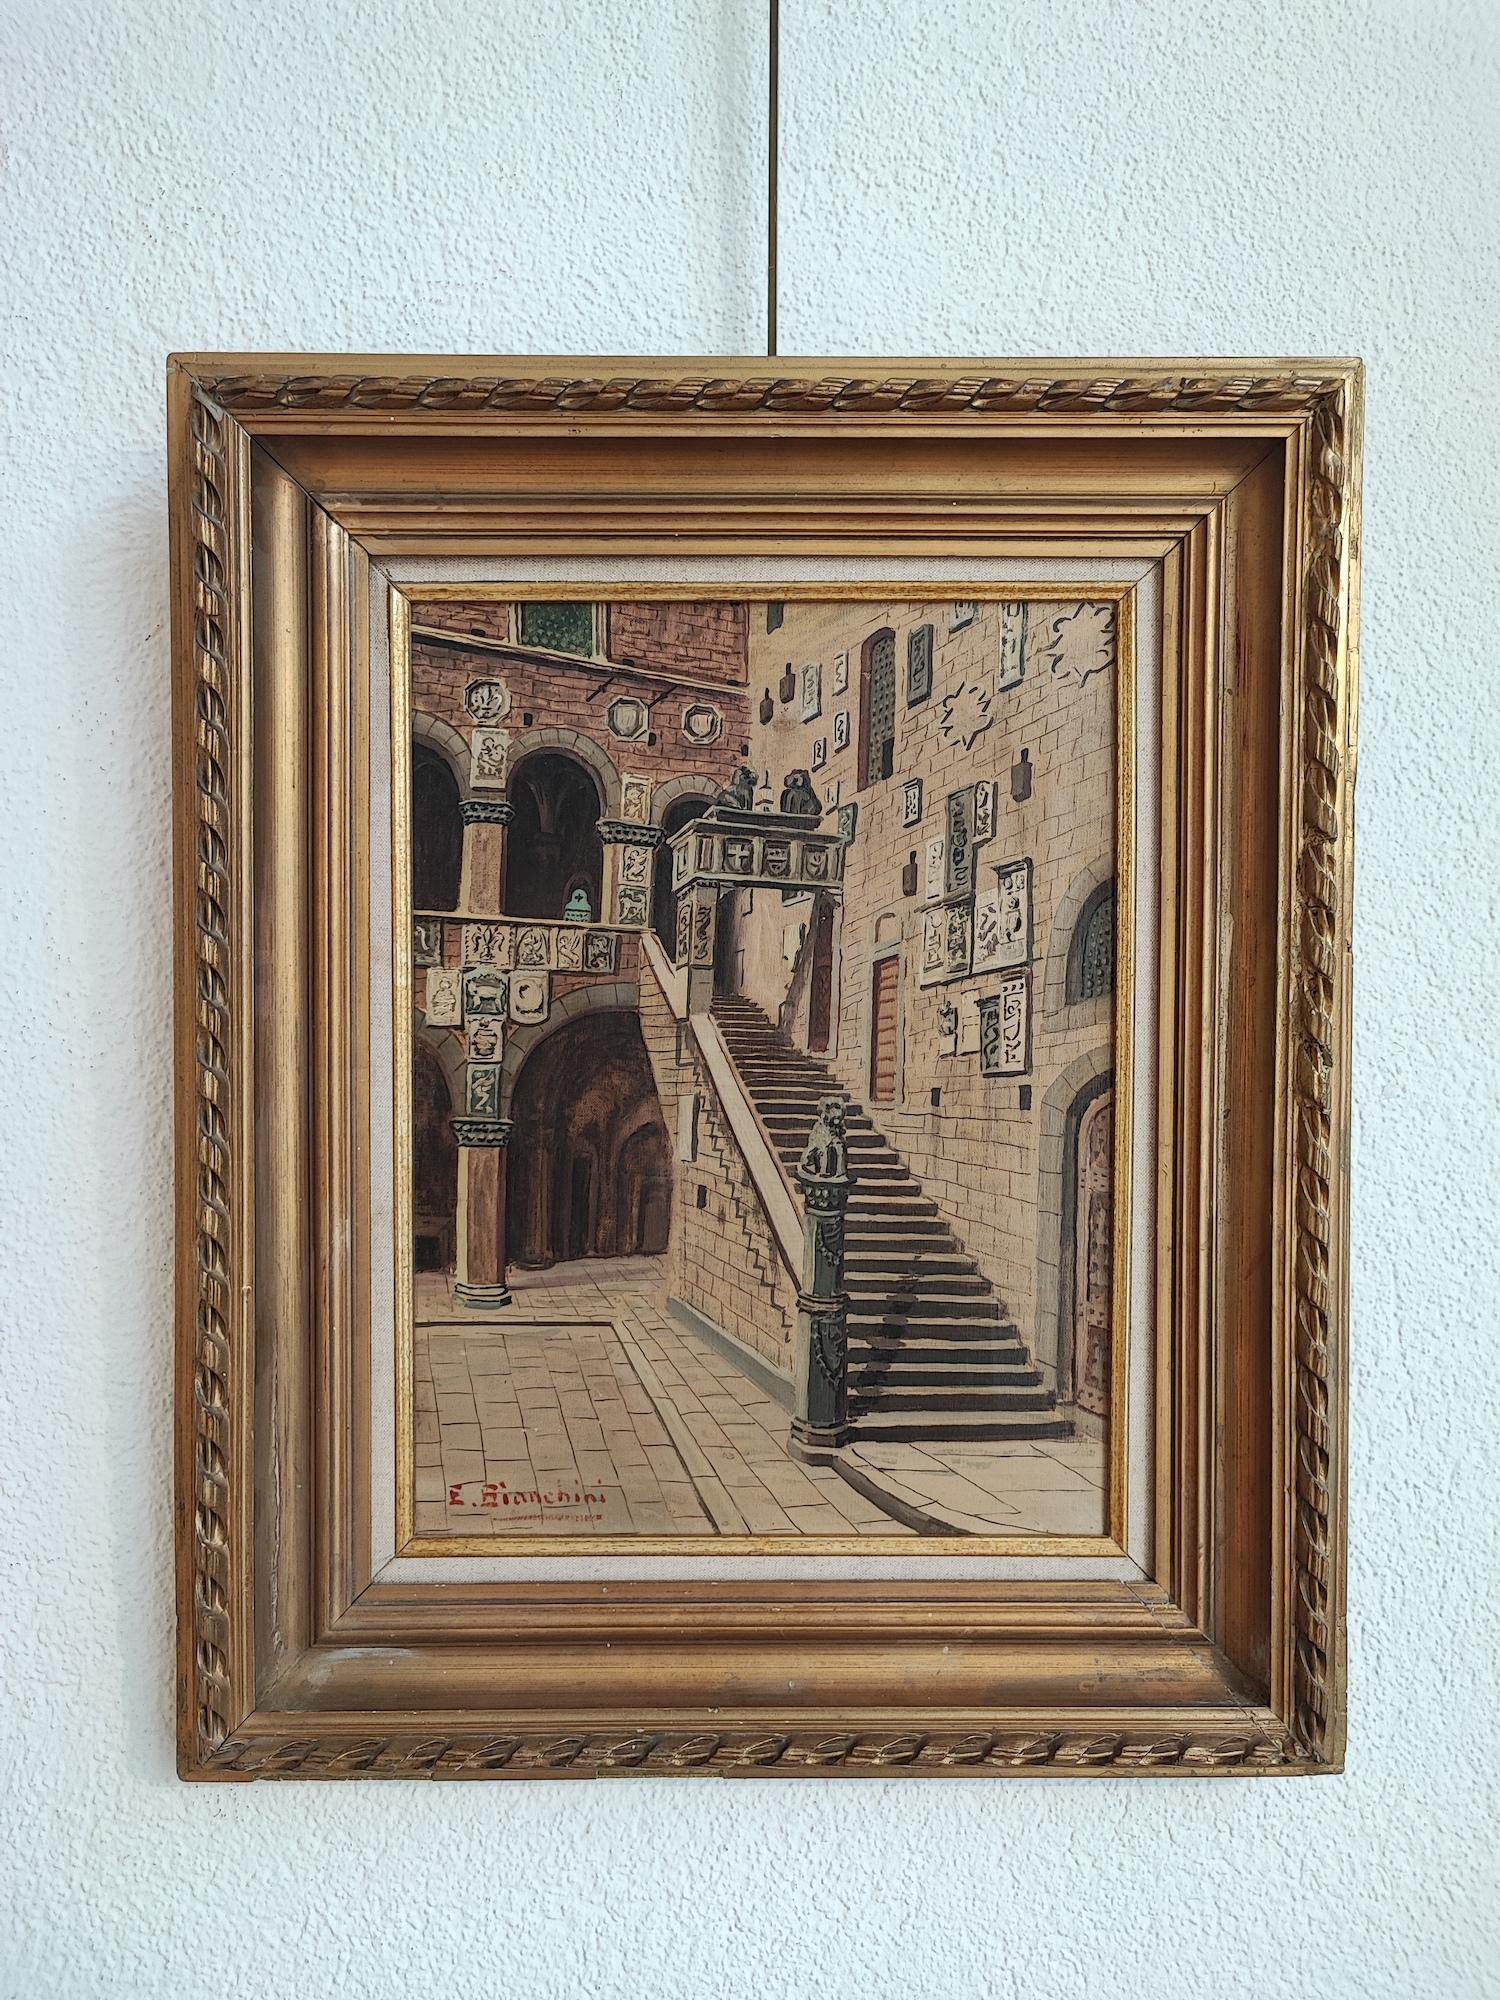 Florence Courtyard of the Bargello - Painting by Enrico Bianchini